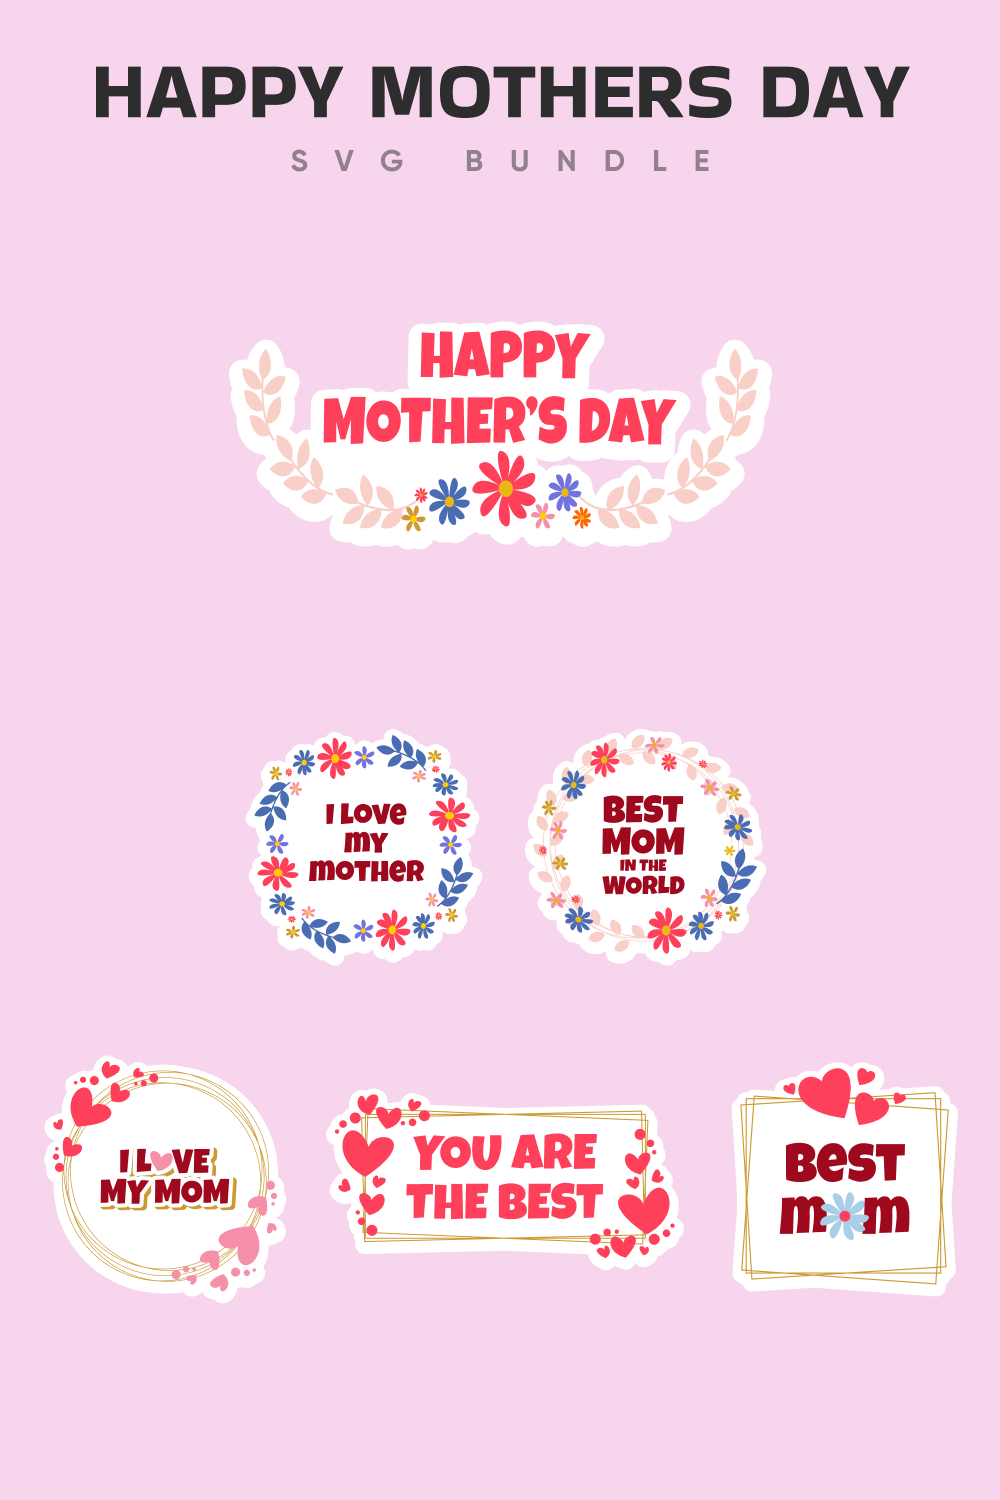 Cute pink background with delicate letterings to Mother's day.